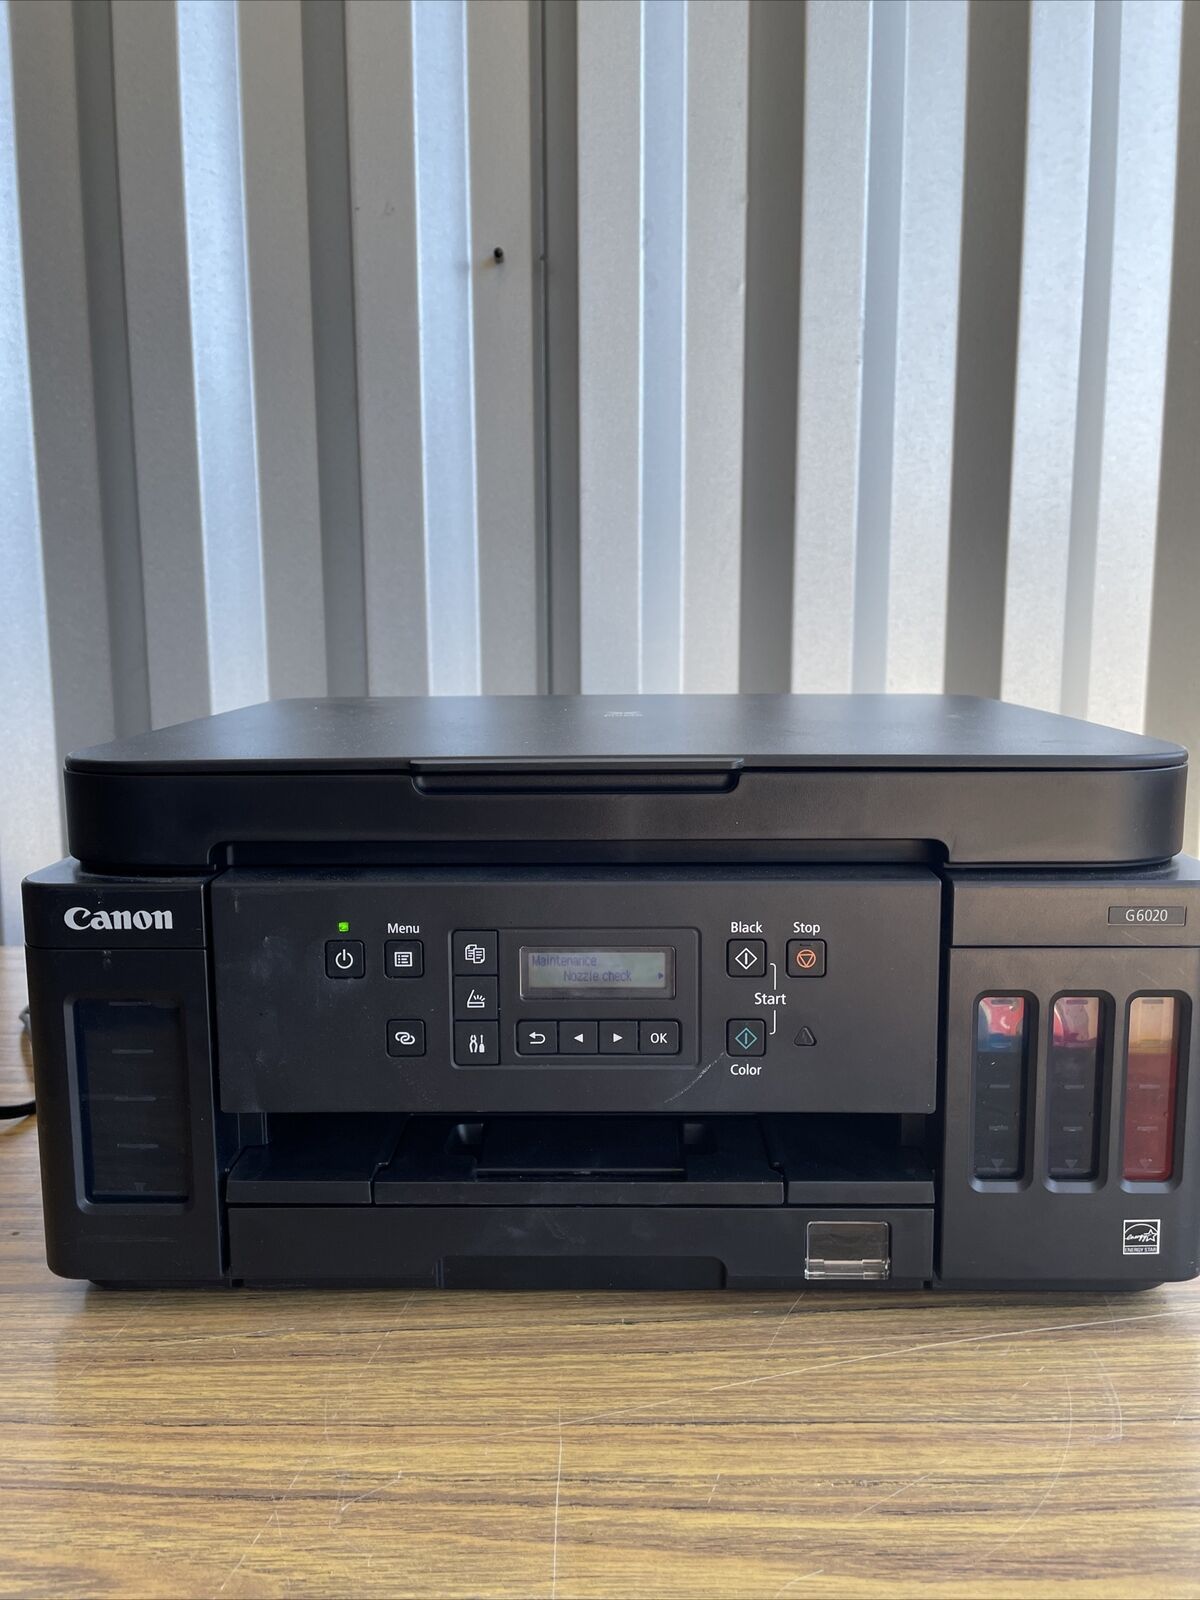 Canon PIXMA G6020 All-in-One Inkjet Printer Tested Works 2838 Page Count